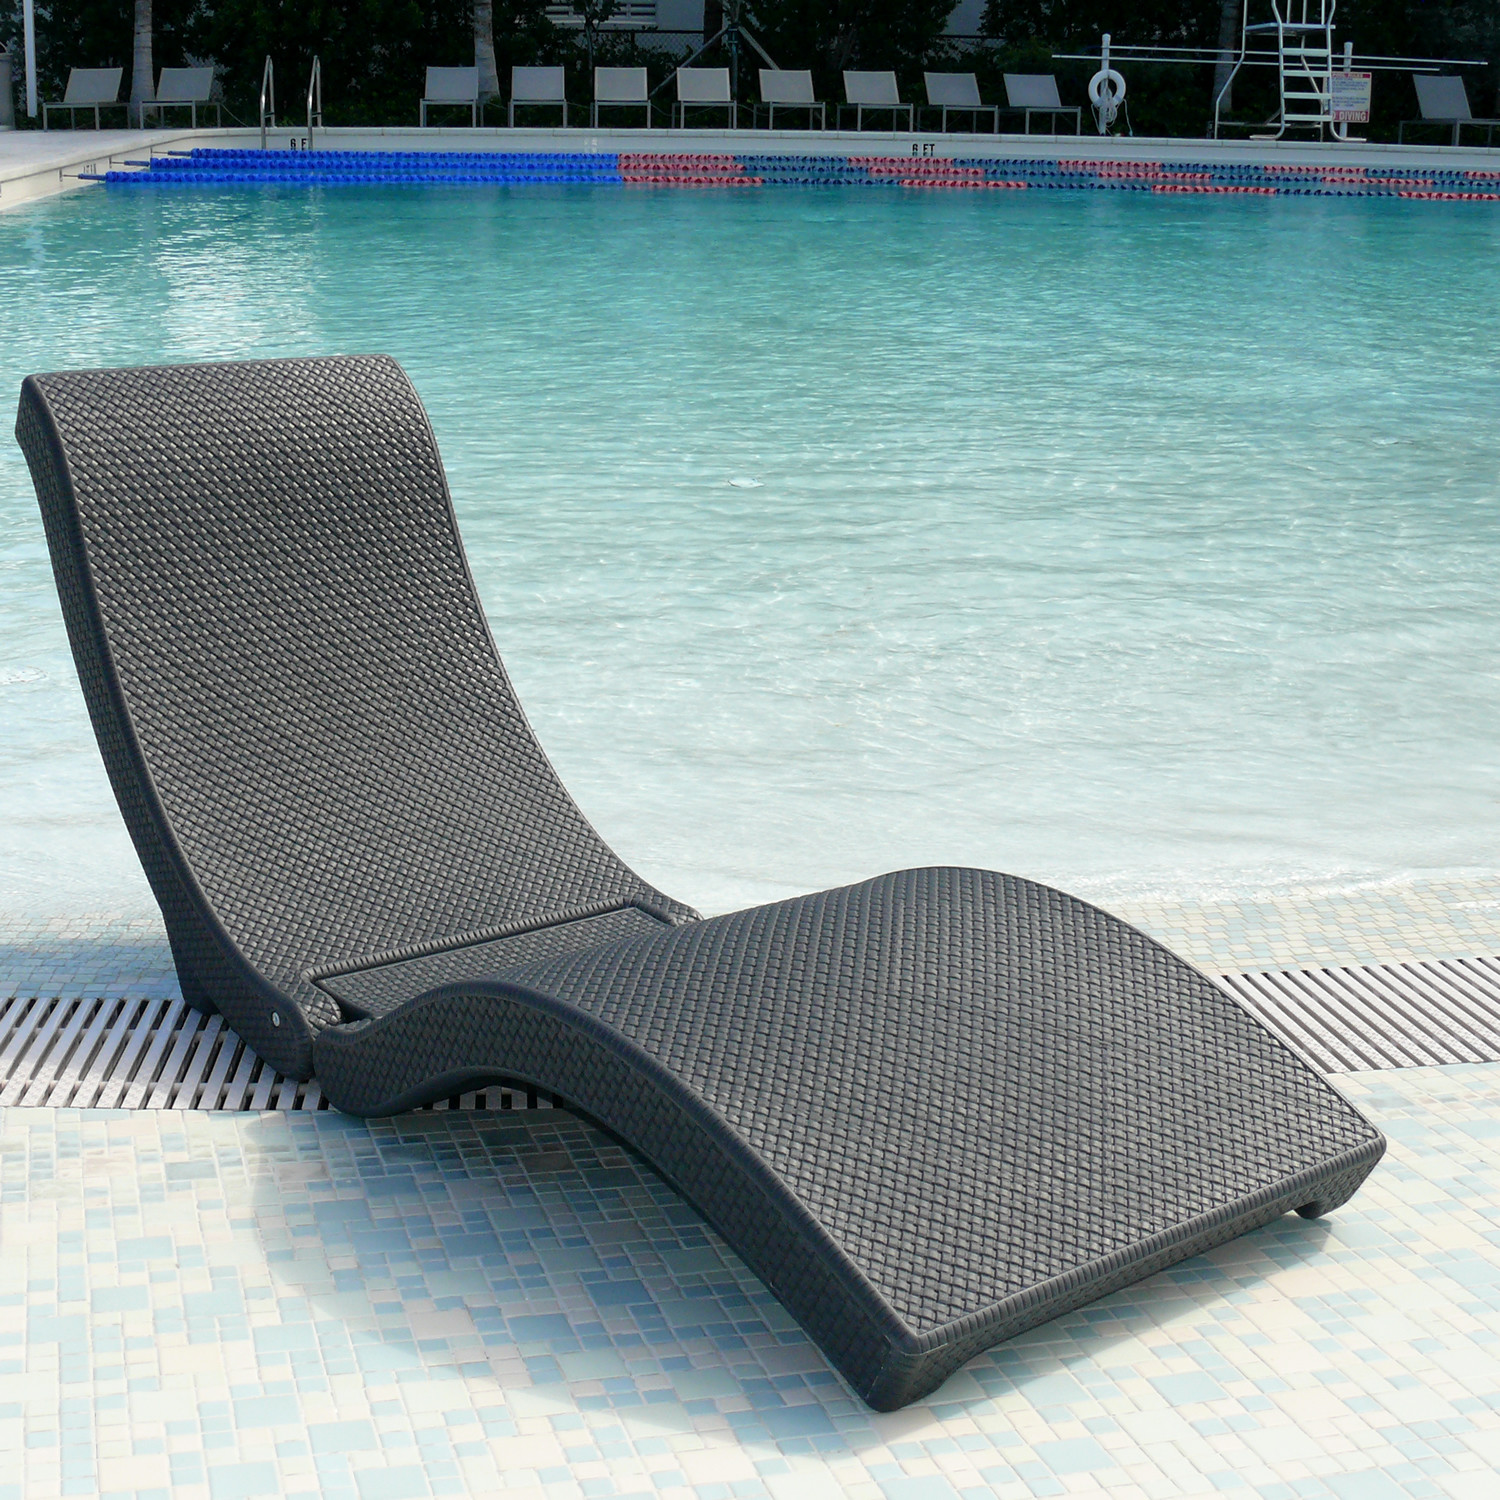 pool chair lounger amazing pool chaise lounge chairs awesome designs